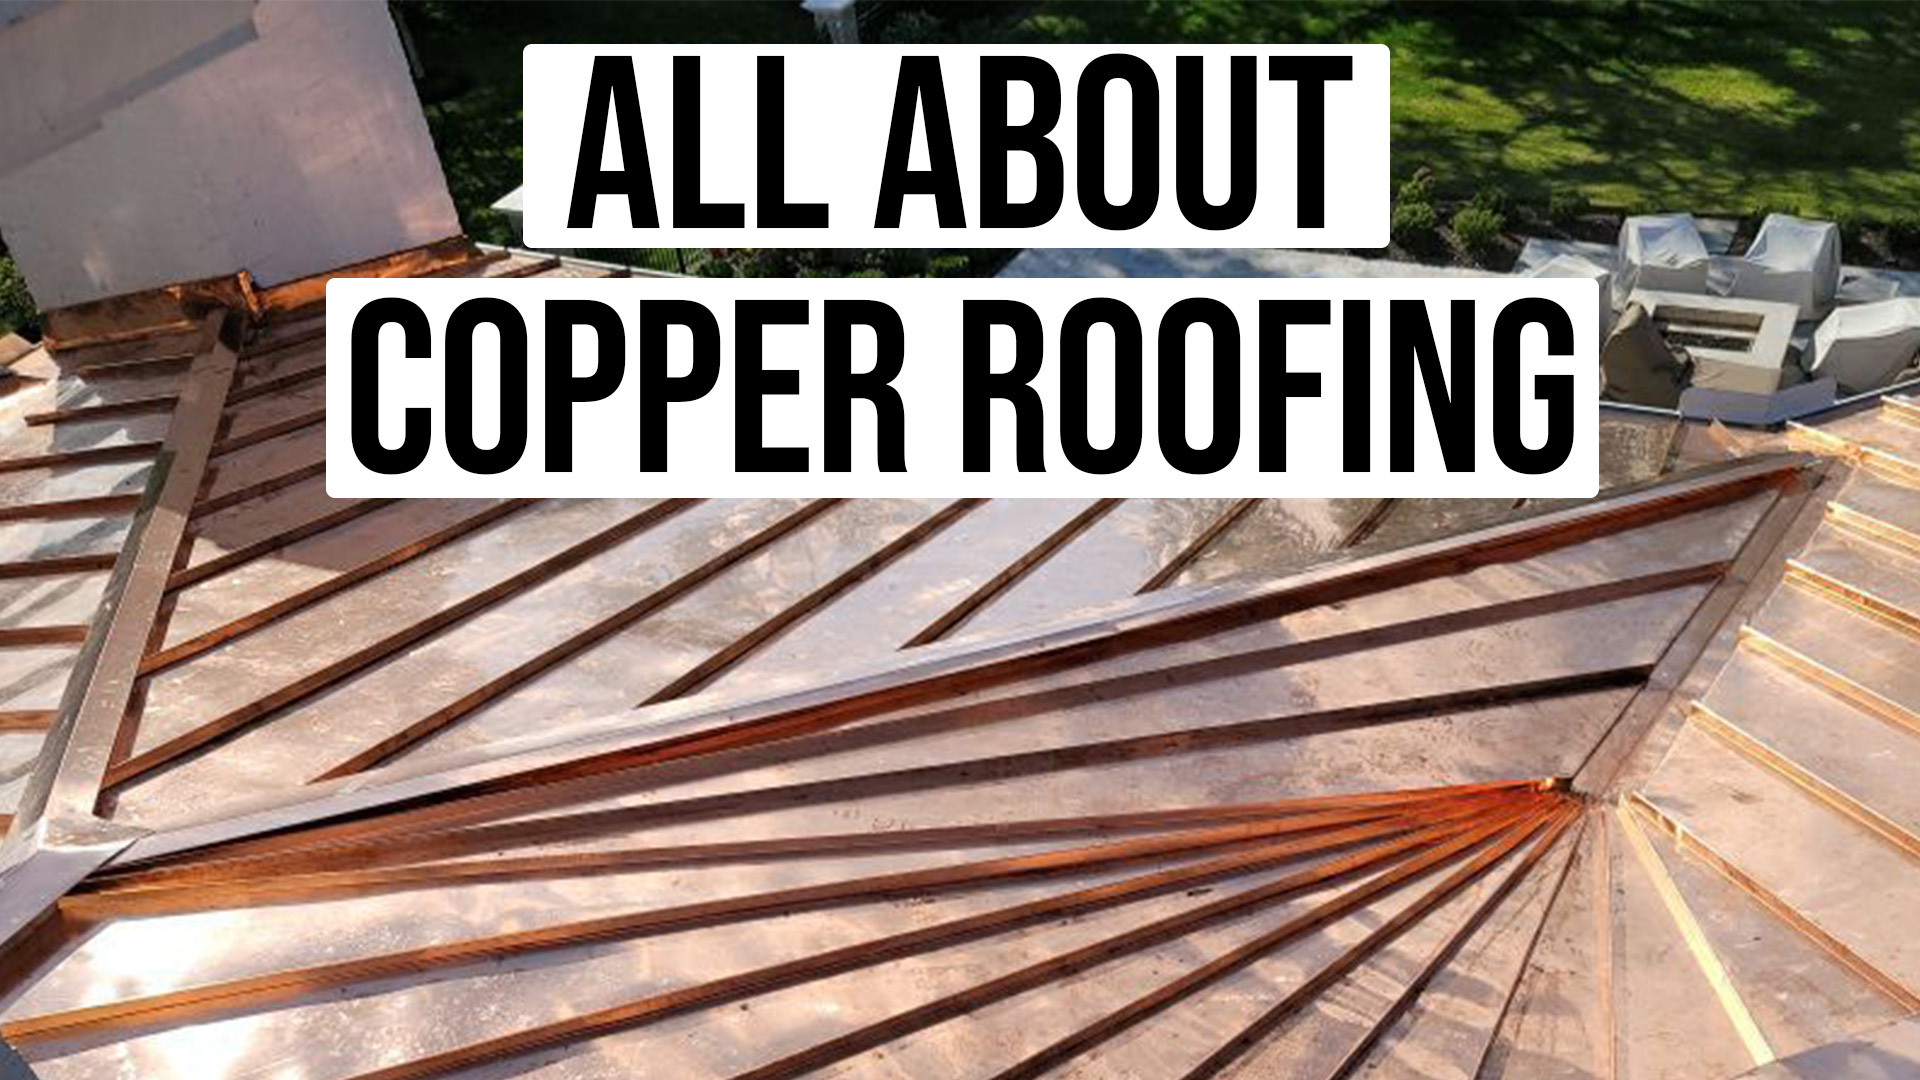 copper roofing service fit video